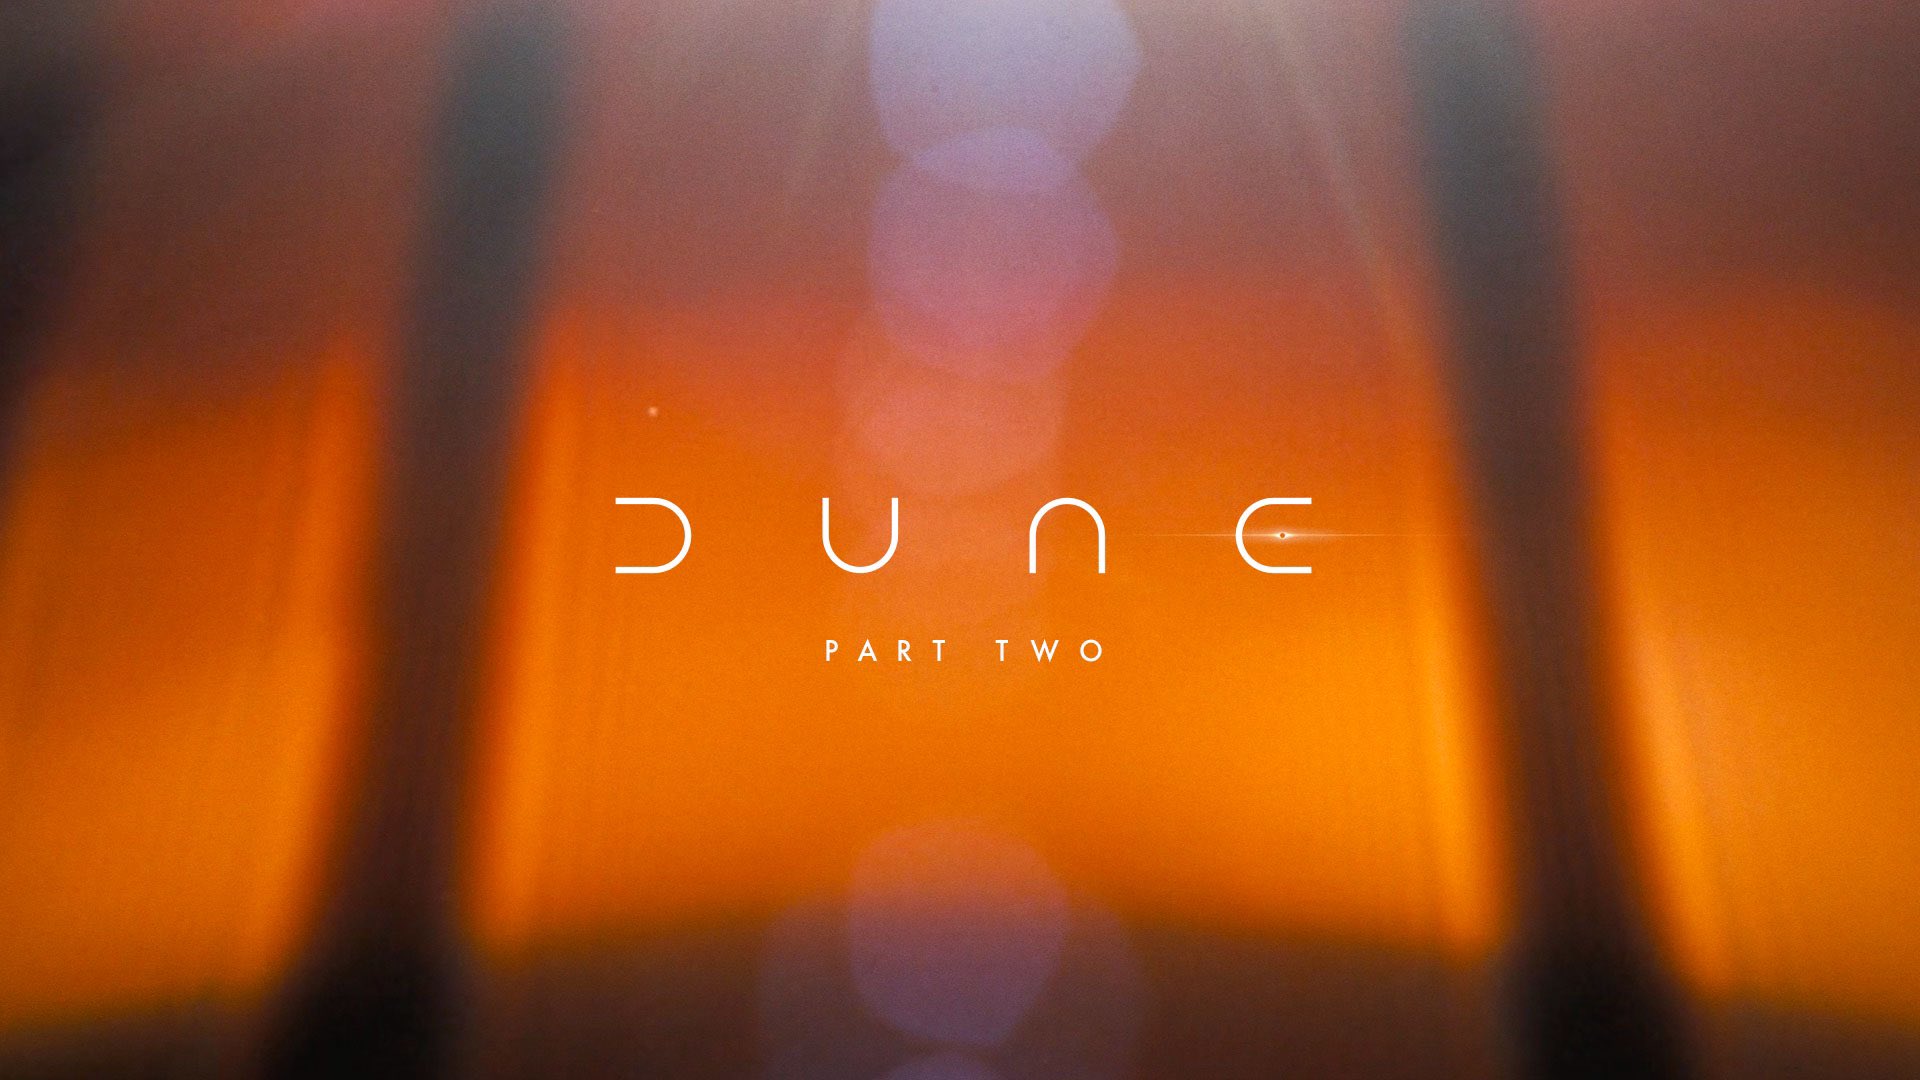 'Dune: Part 2' is officially coming in 2023